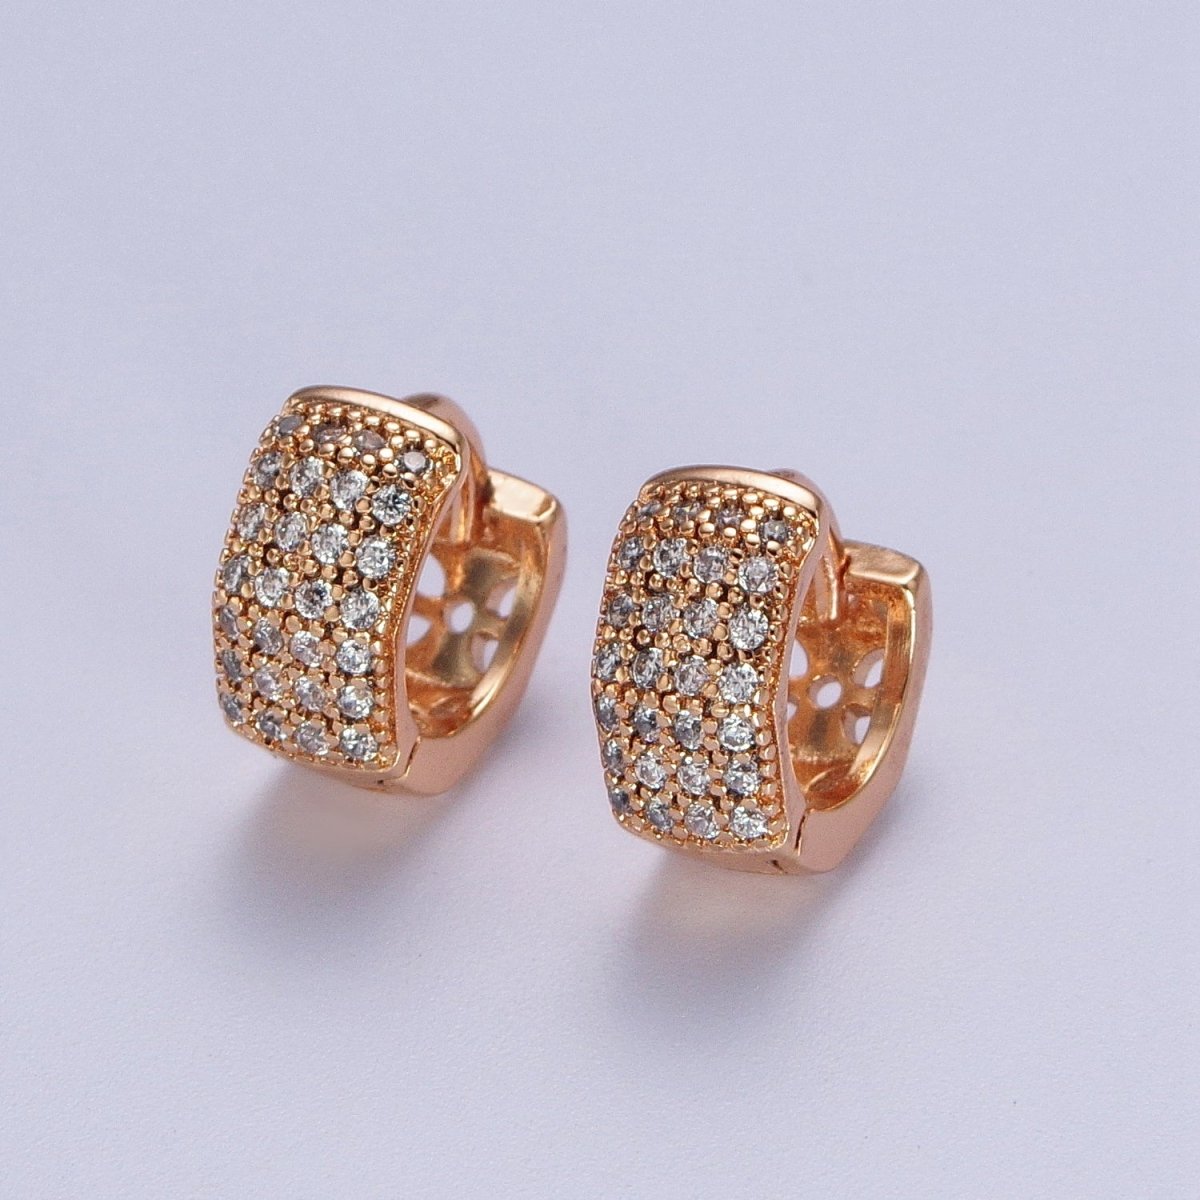 11mm Wide Hexagonal Clear Micro Paved CZ Huggie Earrings in Silver & Pinky Gold P-077 AB-010 - DLUXCA